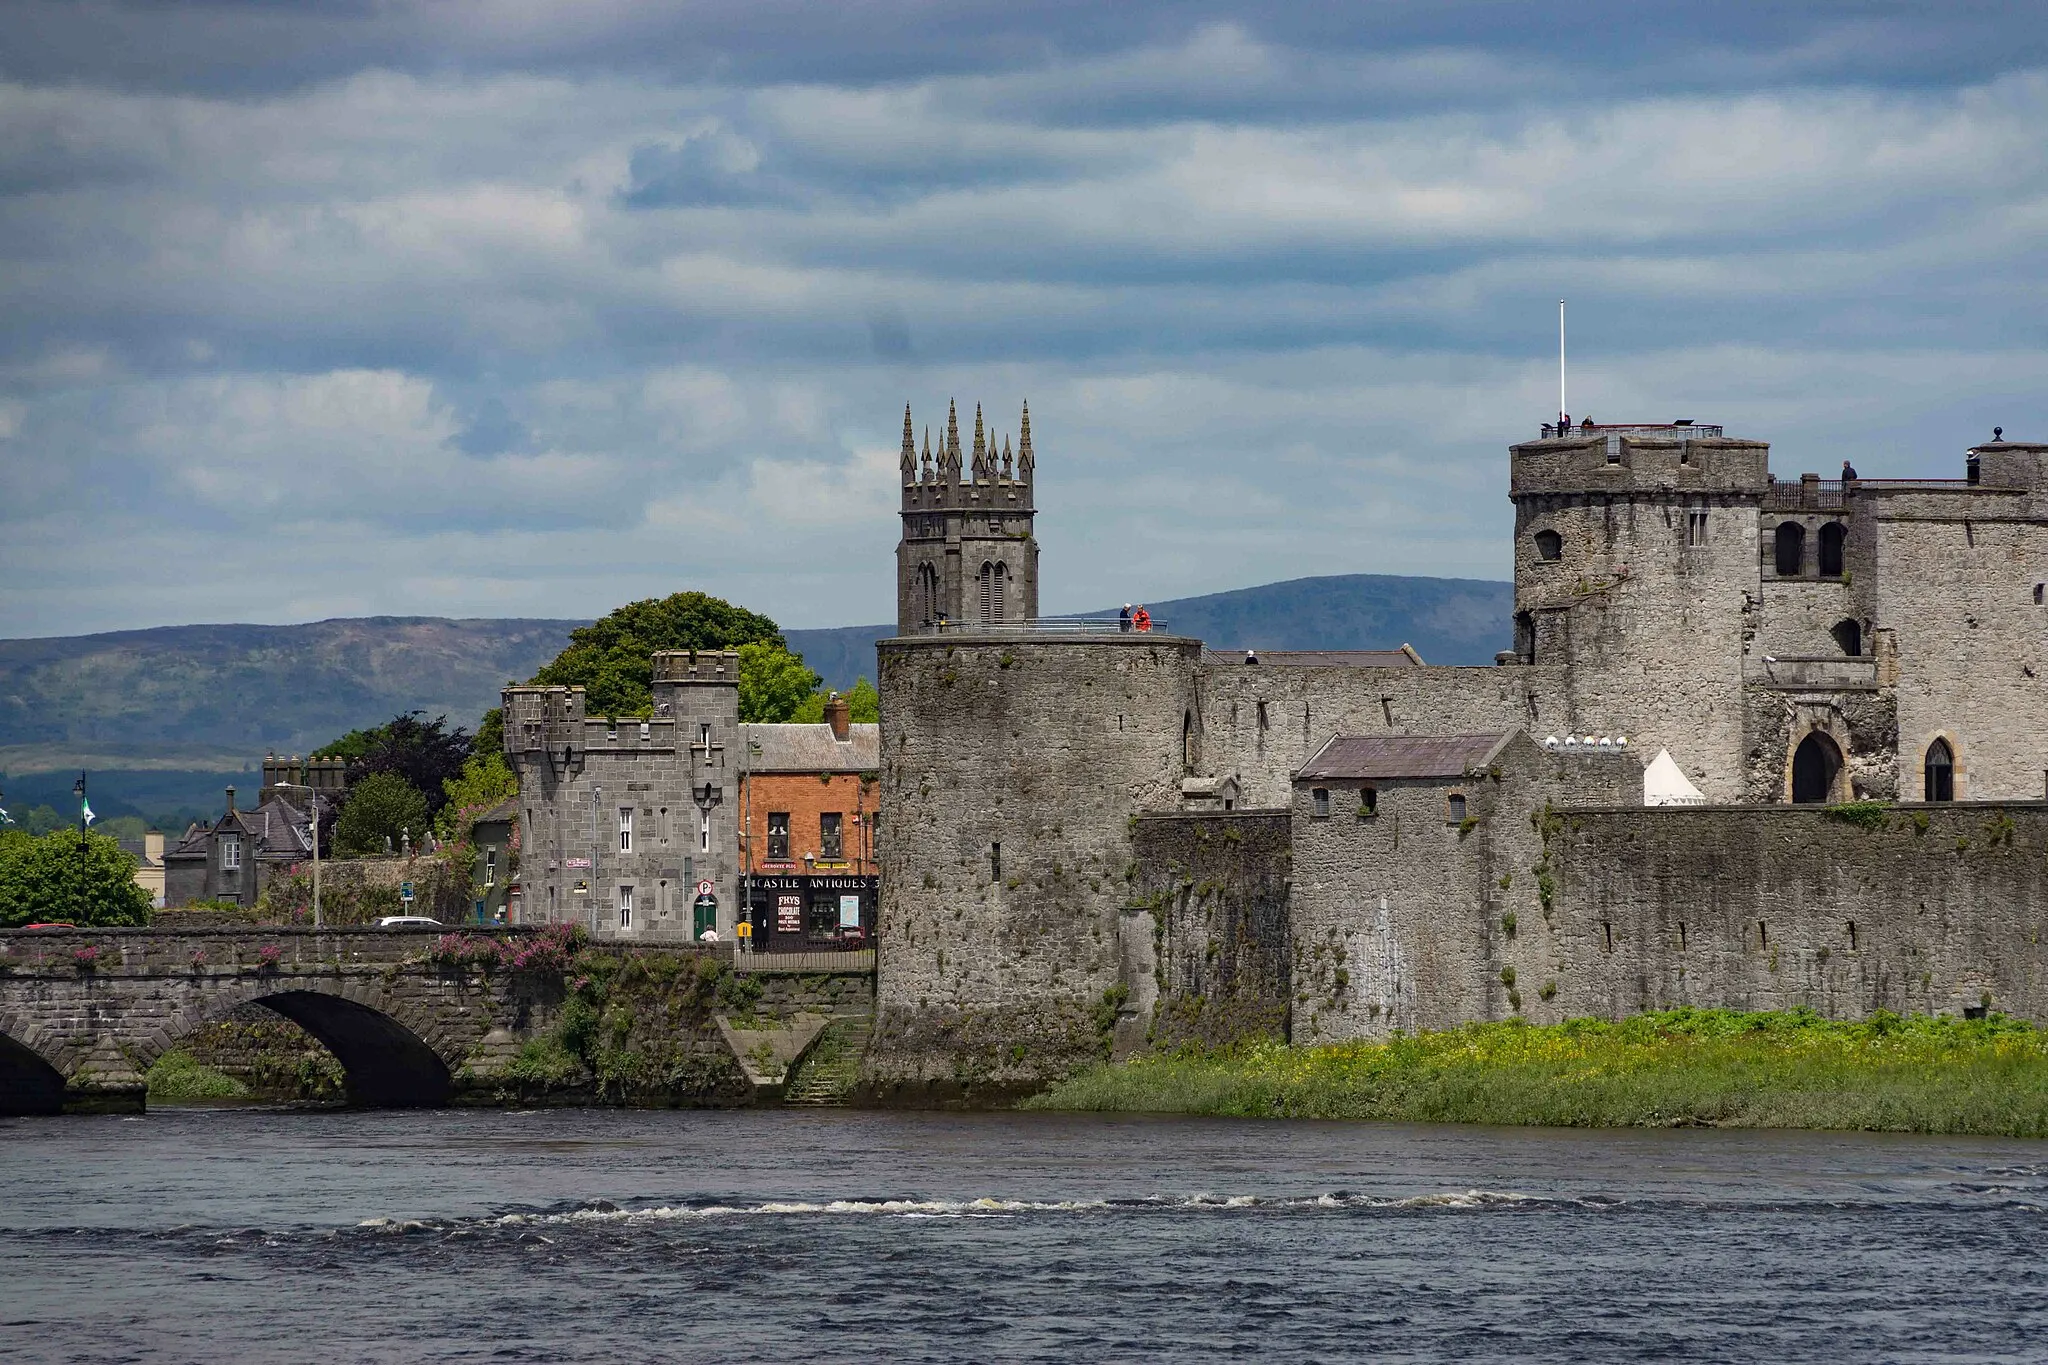 Photo showing: The history of Limerick, stretches back to its establishment by the Vikings as a walled city on King's Island (an island in the River Shannon) in 812, and its charter in 1197.
A great castle was built on the orders of King John in 1200. It was besieged three times in the 17th century, resulting in the famous Treaty of Limerick and the flight of the defeated Catholic leaders abroad. Much of the city was built during the following Georgian prosperity, which ended abruptly with the Act of Union in 1800. The depression has lasted since, apart from a brief hiatus around the end of the last century.
Today the city has a growing multicultural population which means that there are many really good restaurants.

Every time I visit I believe that it has improved since my last visit.